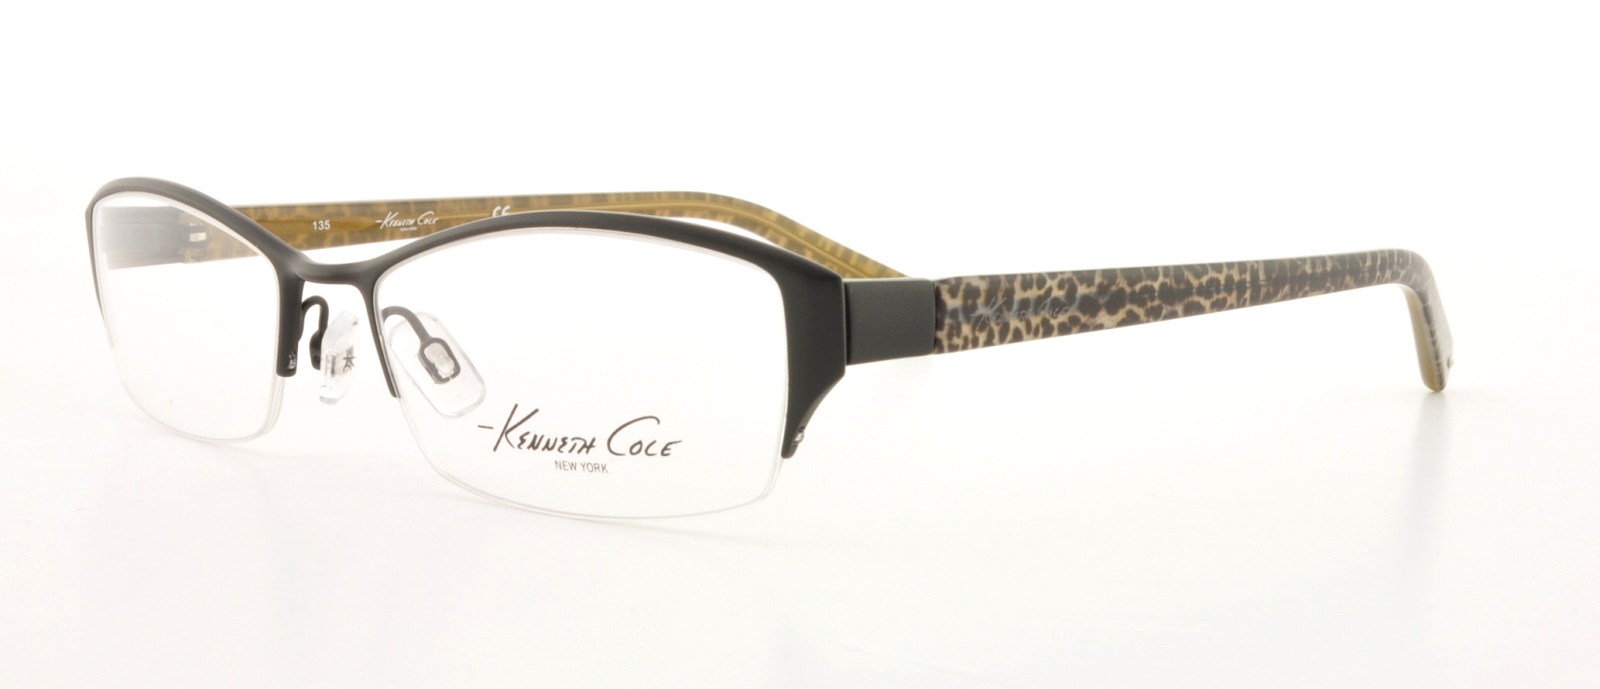 Picture of Kenneth Cole New York Eyeglasses KC 0160